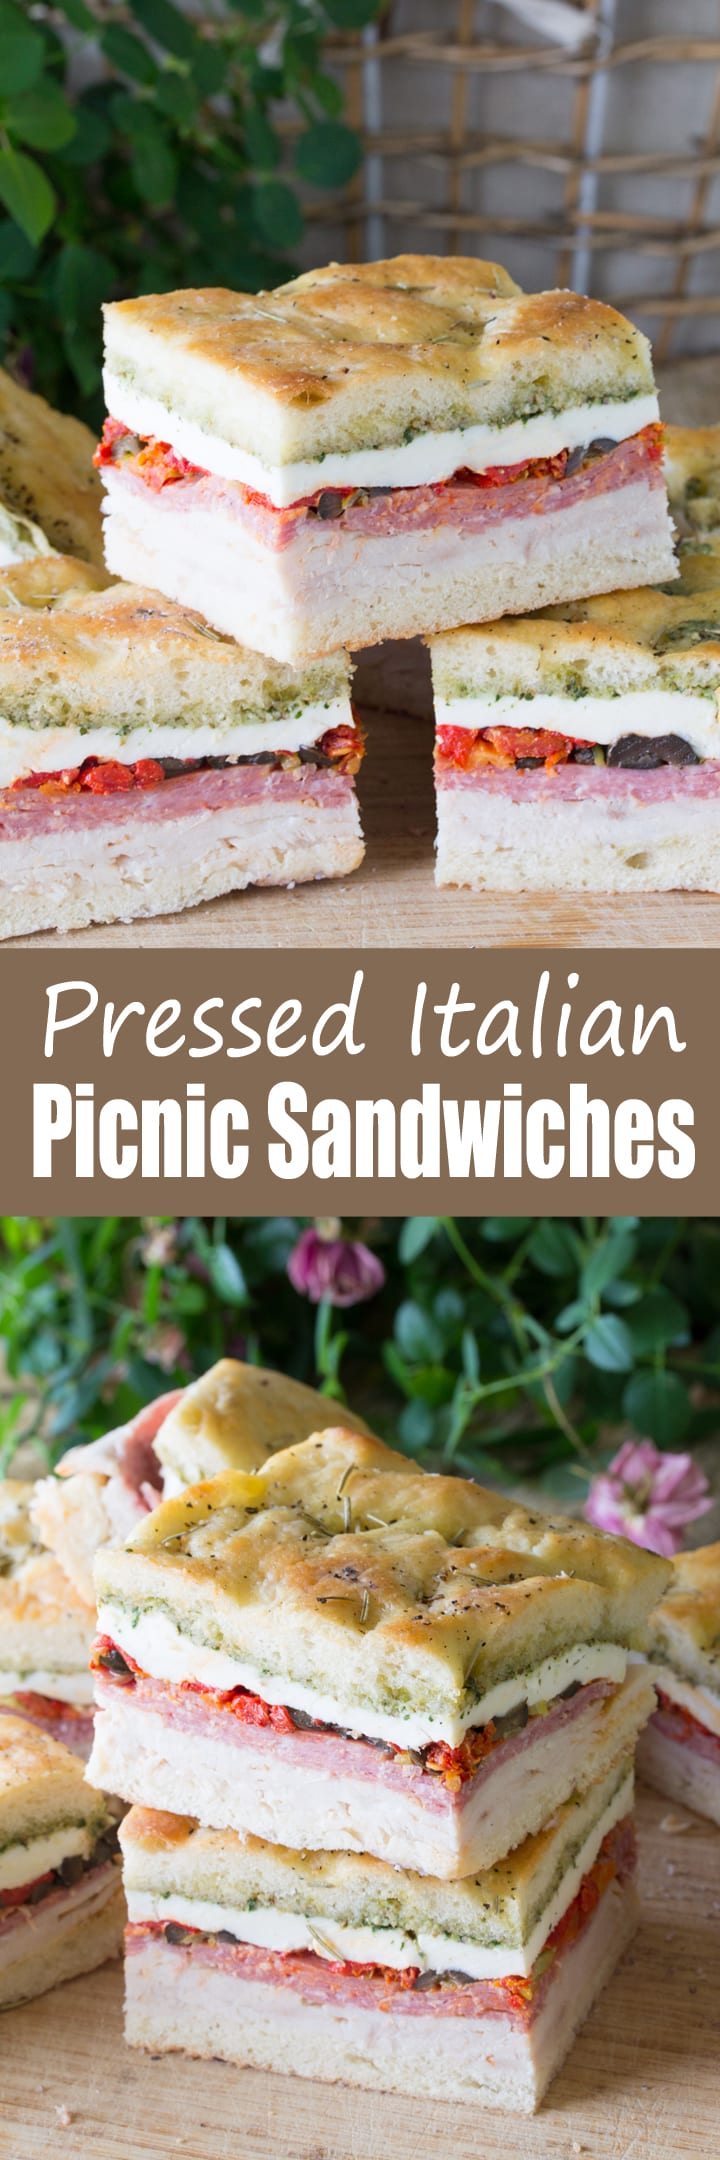 Pressed Italian Picnic Sandwiches are the perfect upscale sandwich for picnics, brunches, and baby showers. It's a fancy sandwich that packs a flavorful punch!